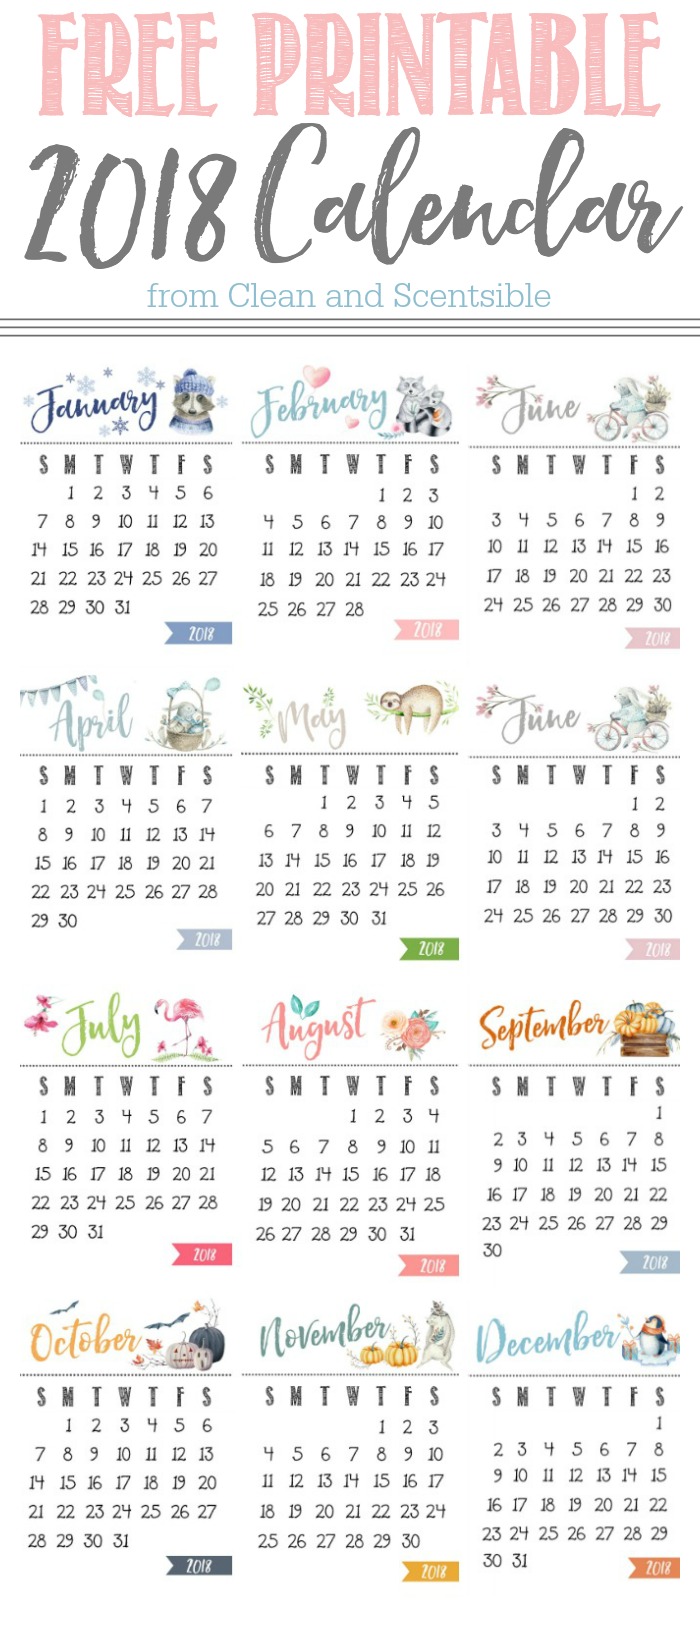 Free Printable Calendar Clean and Scentsible